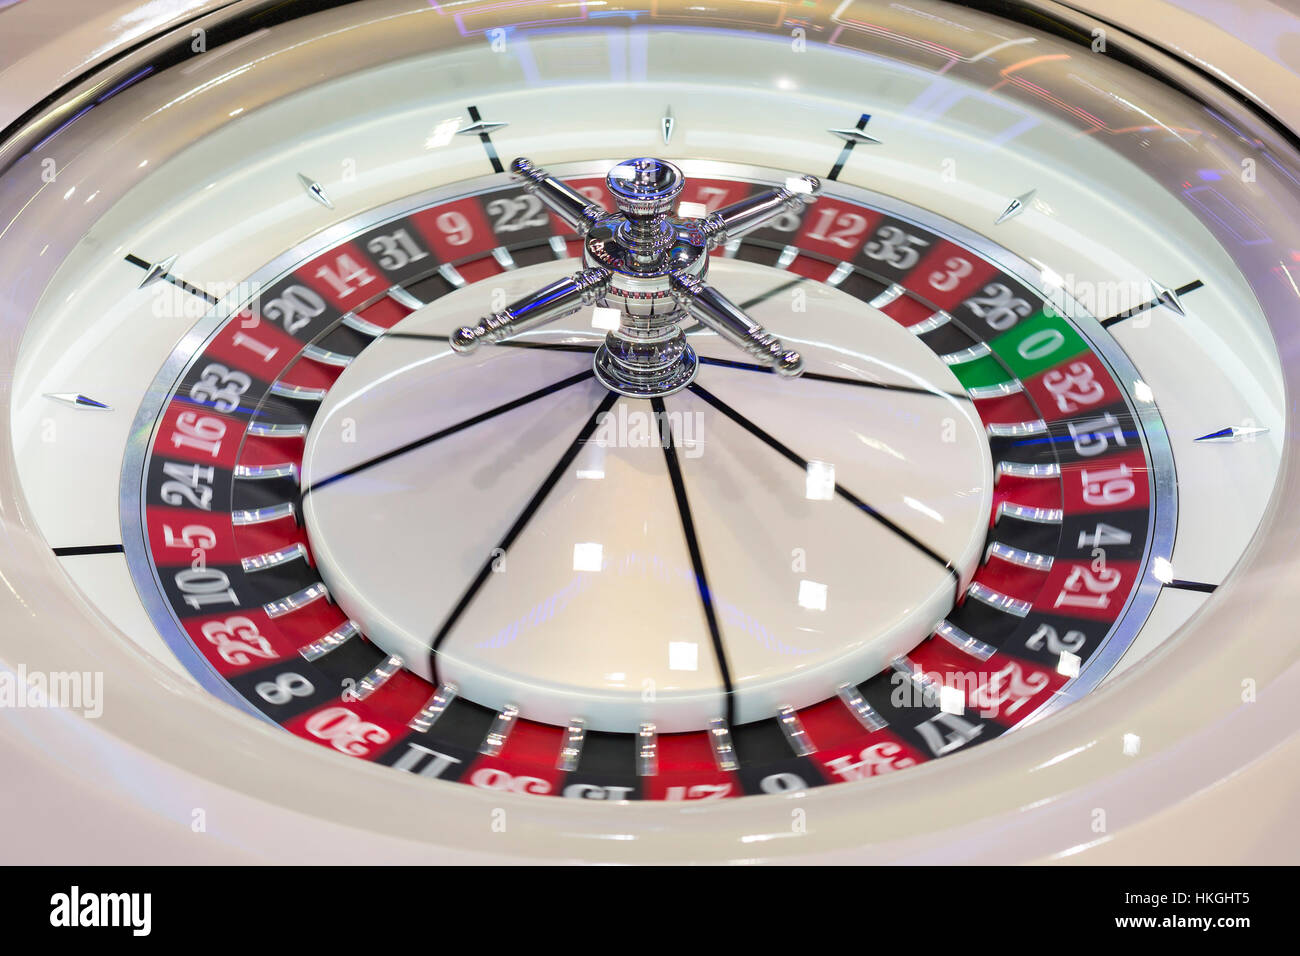 Modern roulette table in casino. Ball in the rotating gambling machine. Colourful roulette wheel. Stock Photo